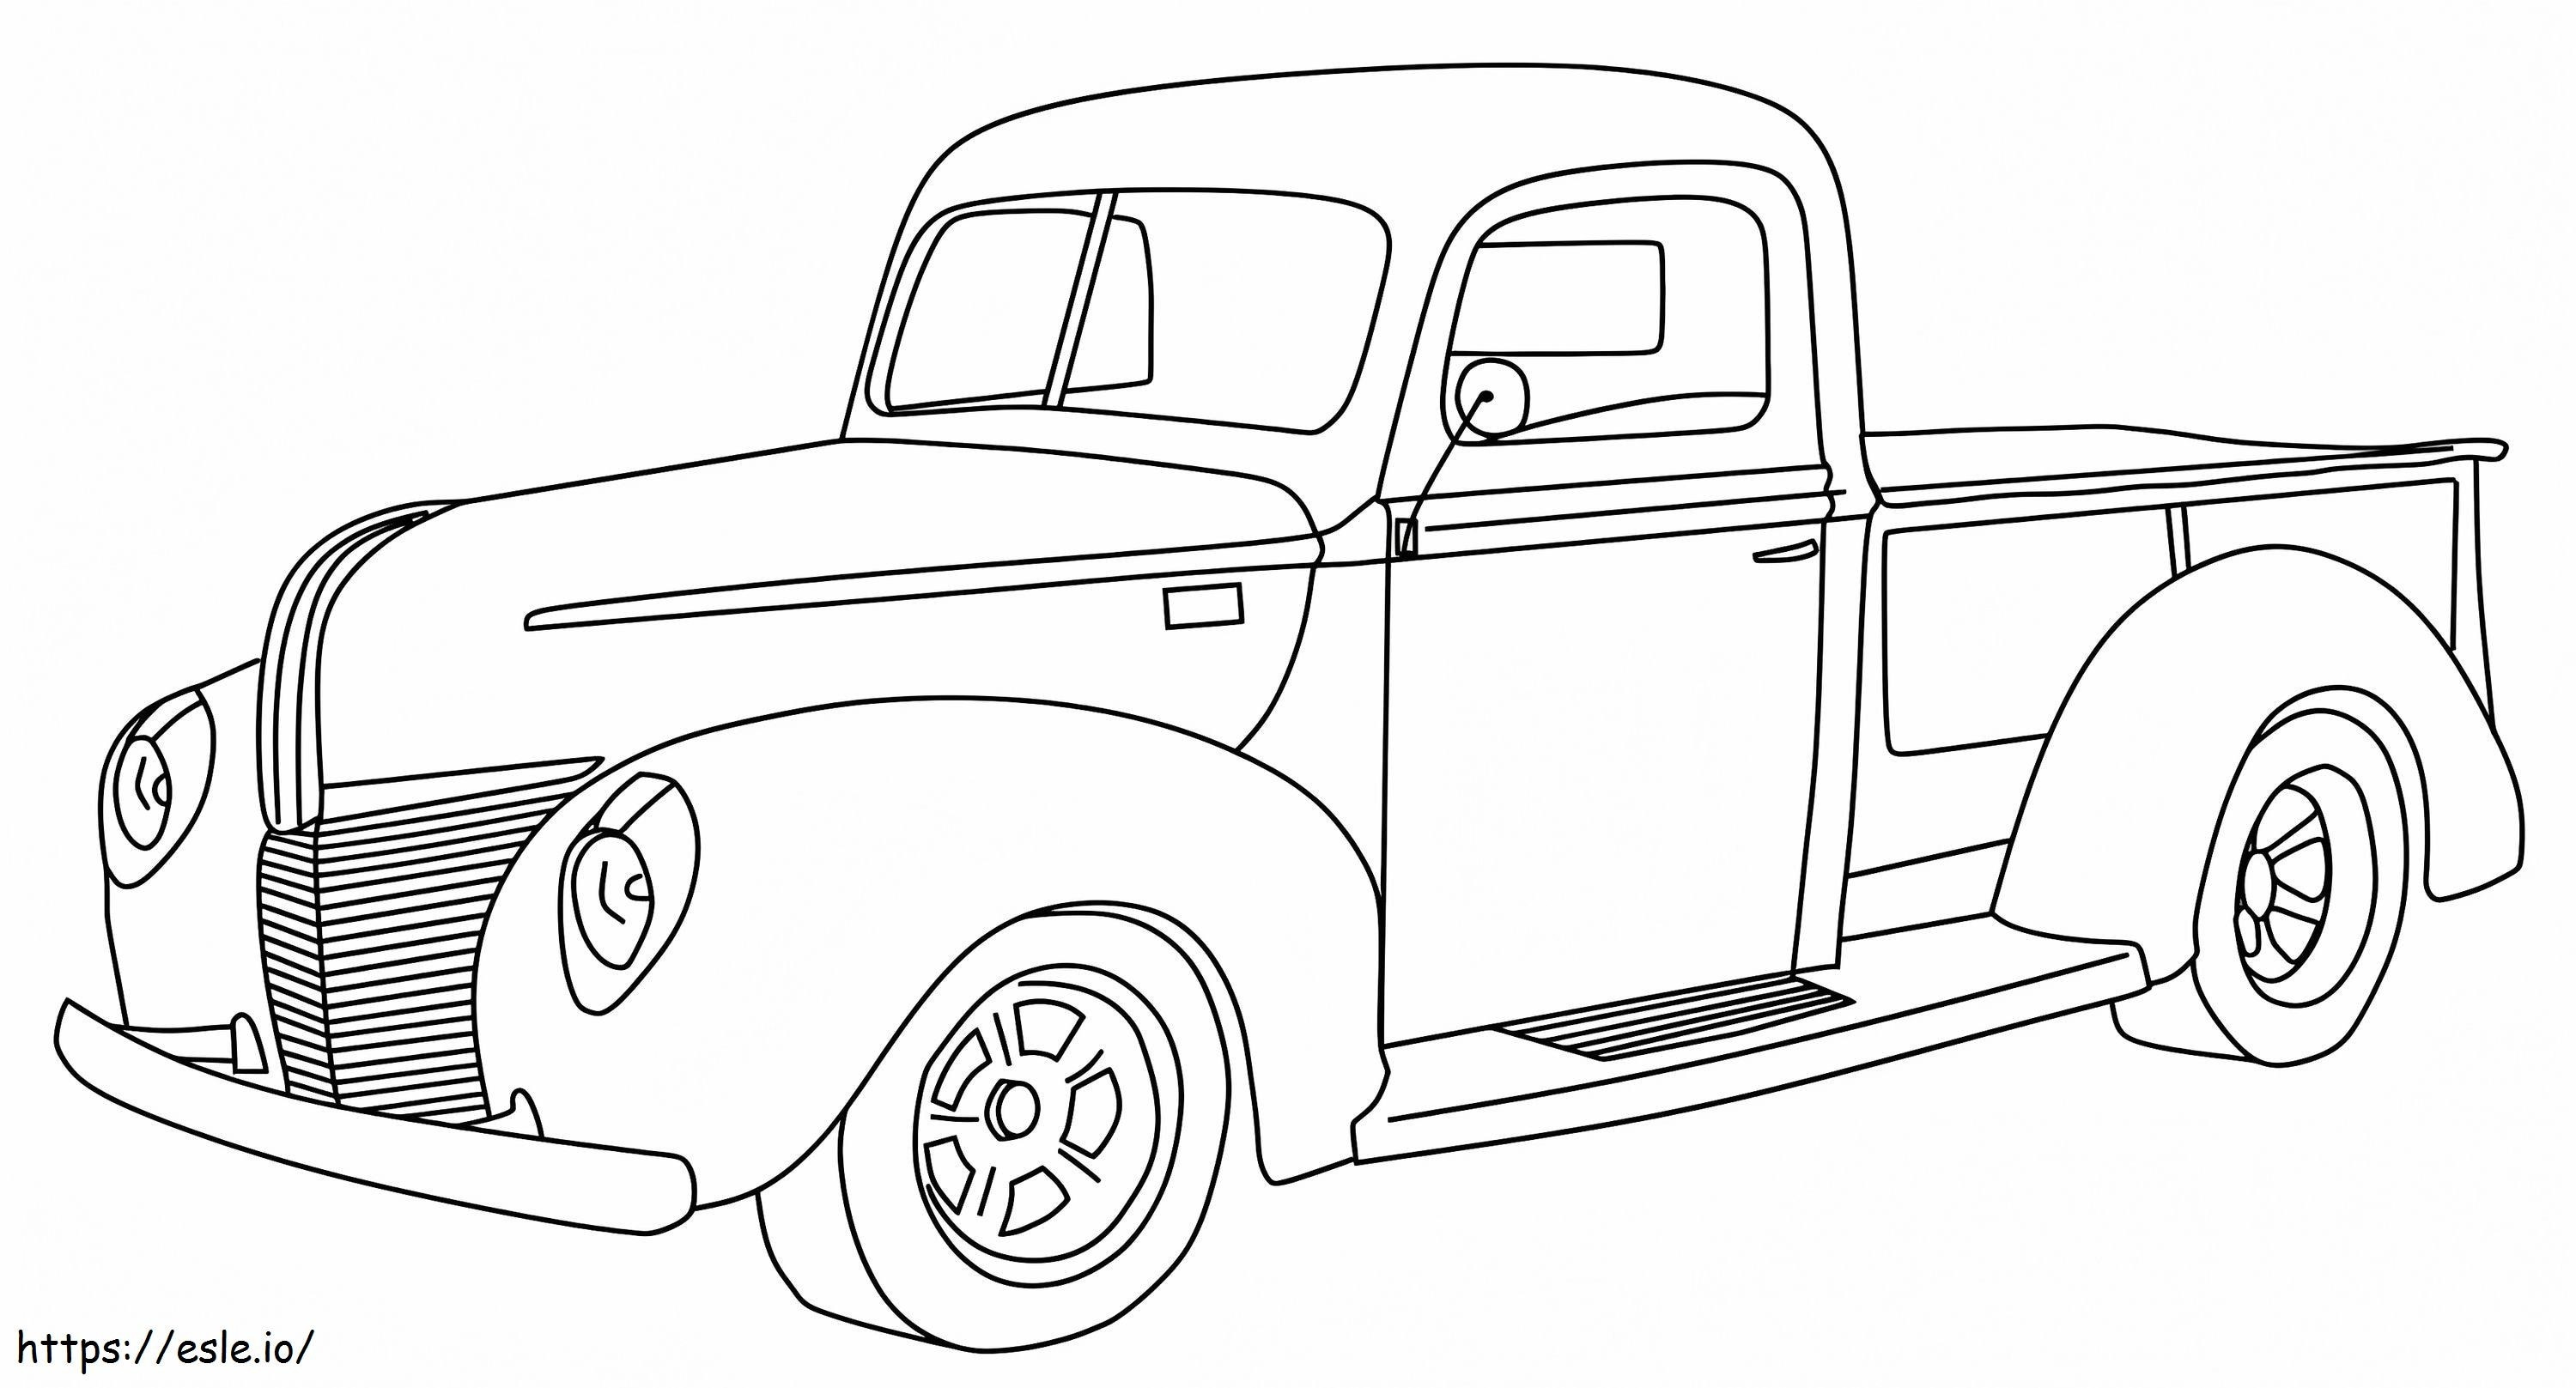 1560761911 1940 Ford Pickup A4 E1600617855510 coloring page